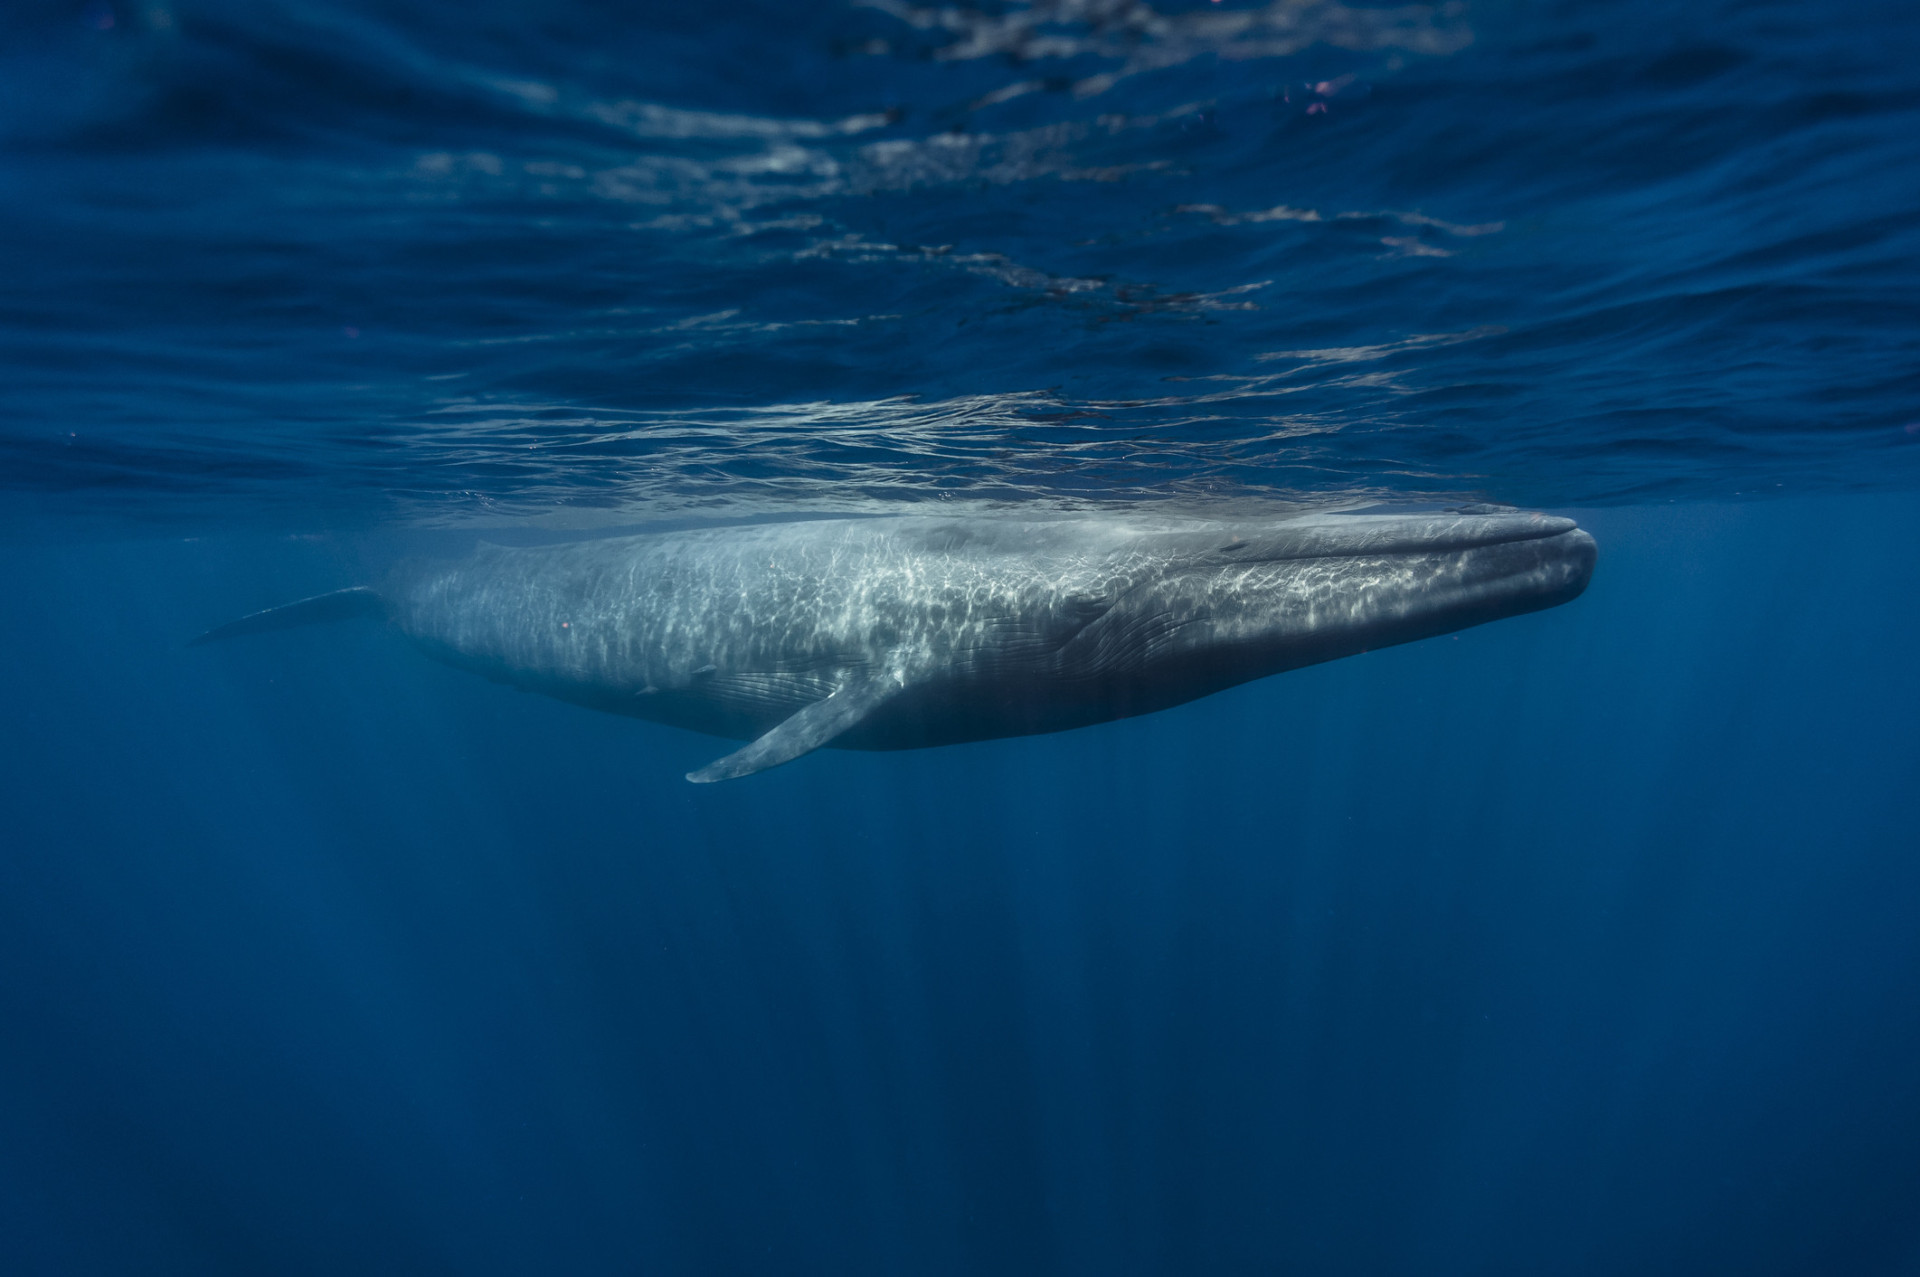 Visit the extreme southernmost tip of the country between January and April and you'll have a good chance of spotting migrating whales, including the biggest of them all, the blue whale.<p><a href="https://www.msn.com/en-us/community/channel/vid-7xx8mnucu55yw63we9va2gwr7uihbxwc68fxqp25x6tg4ftibpra?cvid=94631541bc0f4f89bfd59158d696ad7e">Follow us and access great exclusive content every day</a></p>